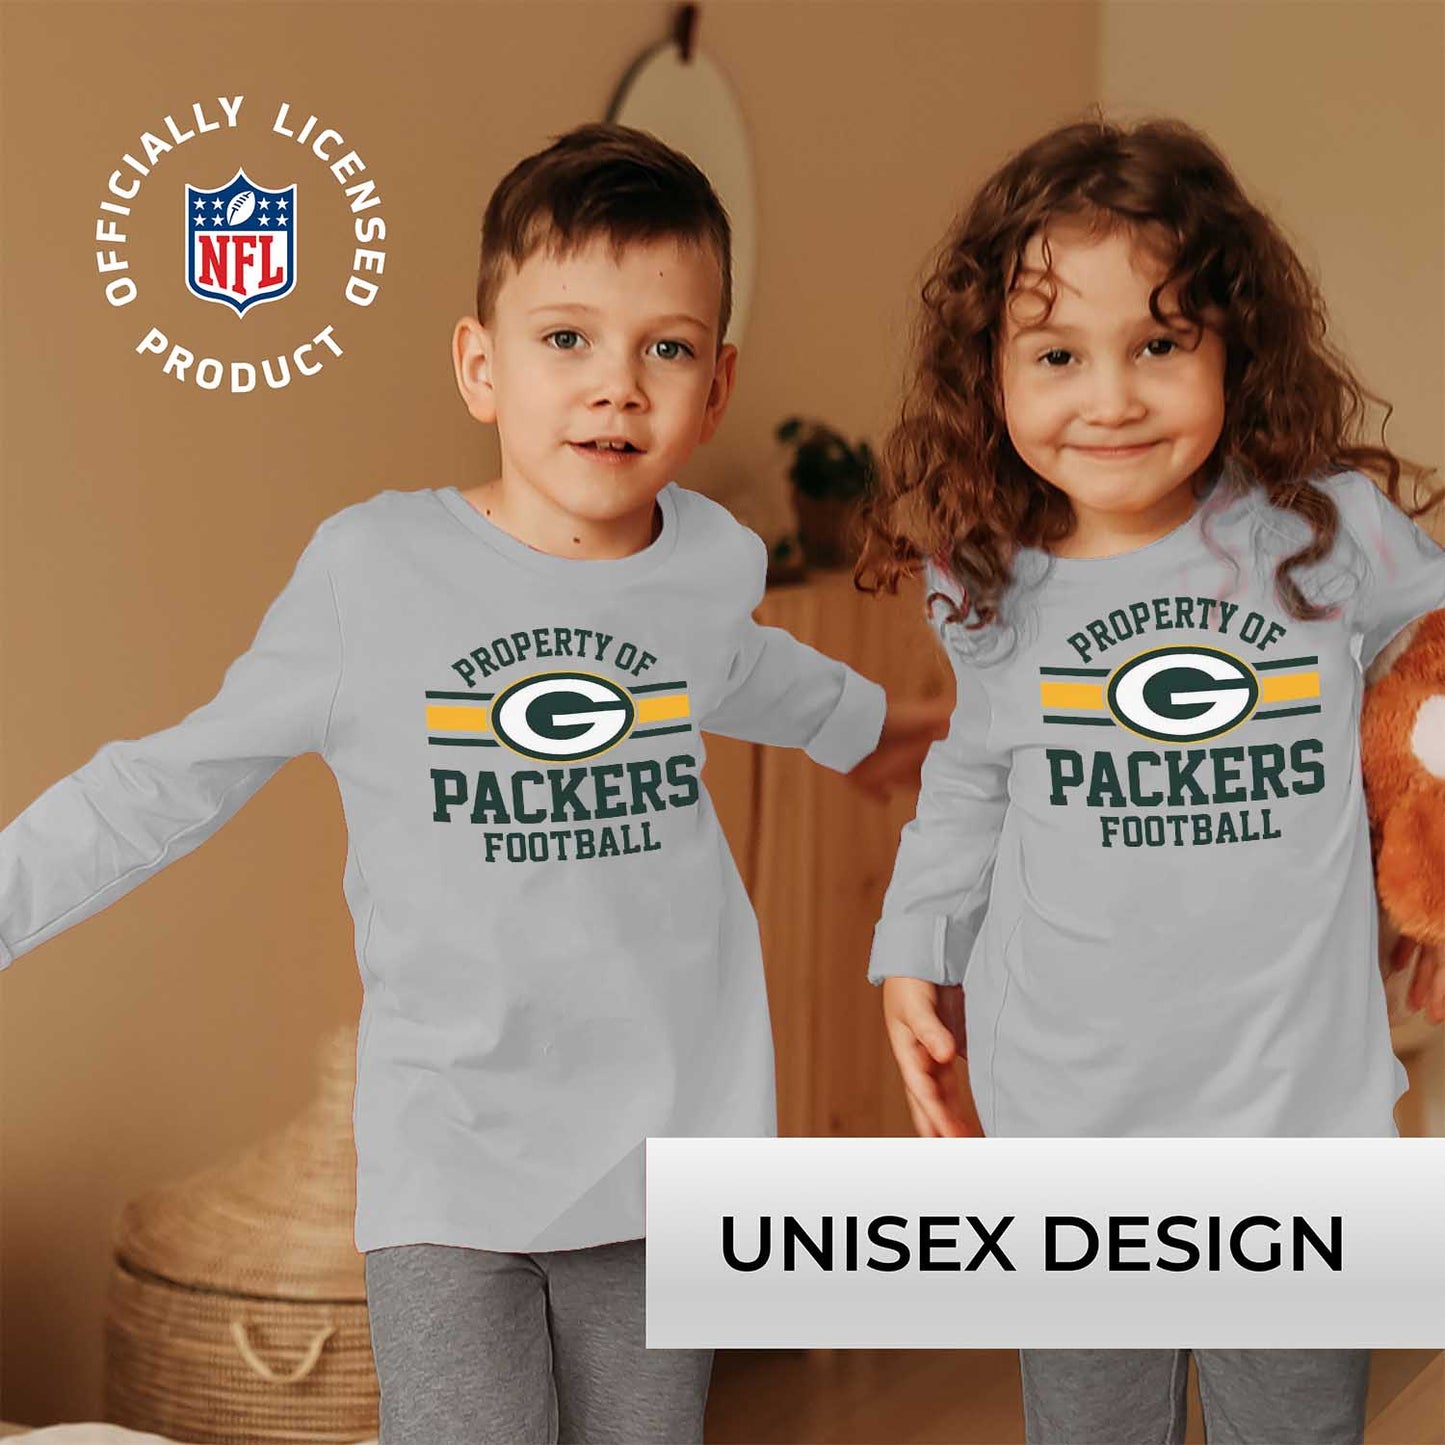 Green Bay Packers NFL Youth Property Of Crew Sweatshirt - Sport Gray